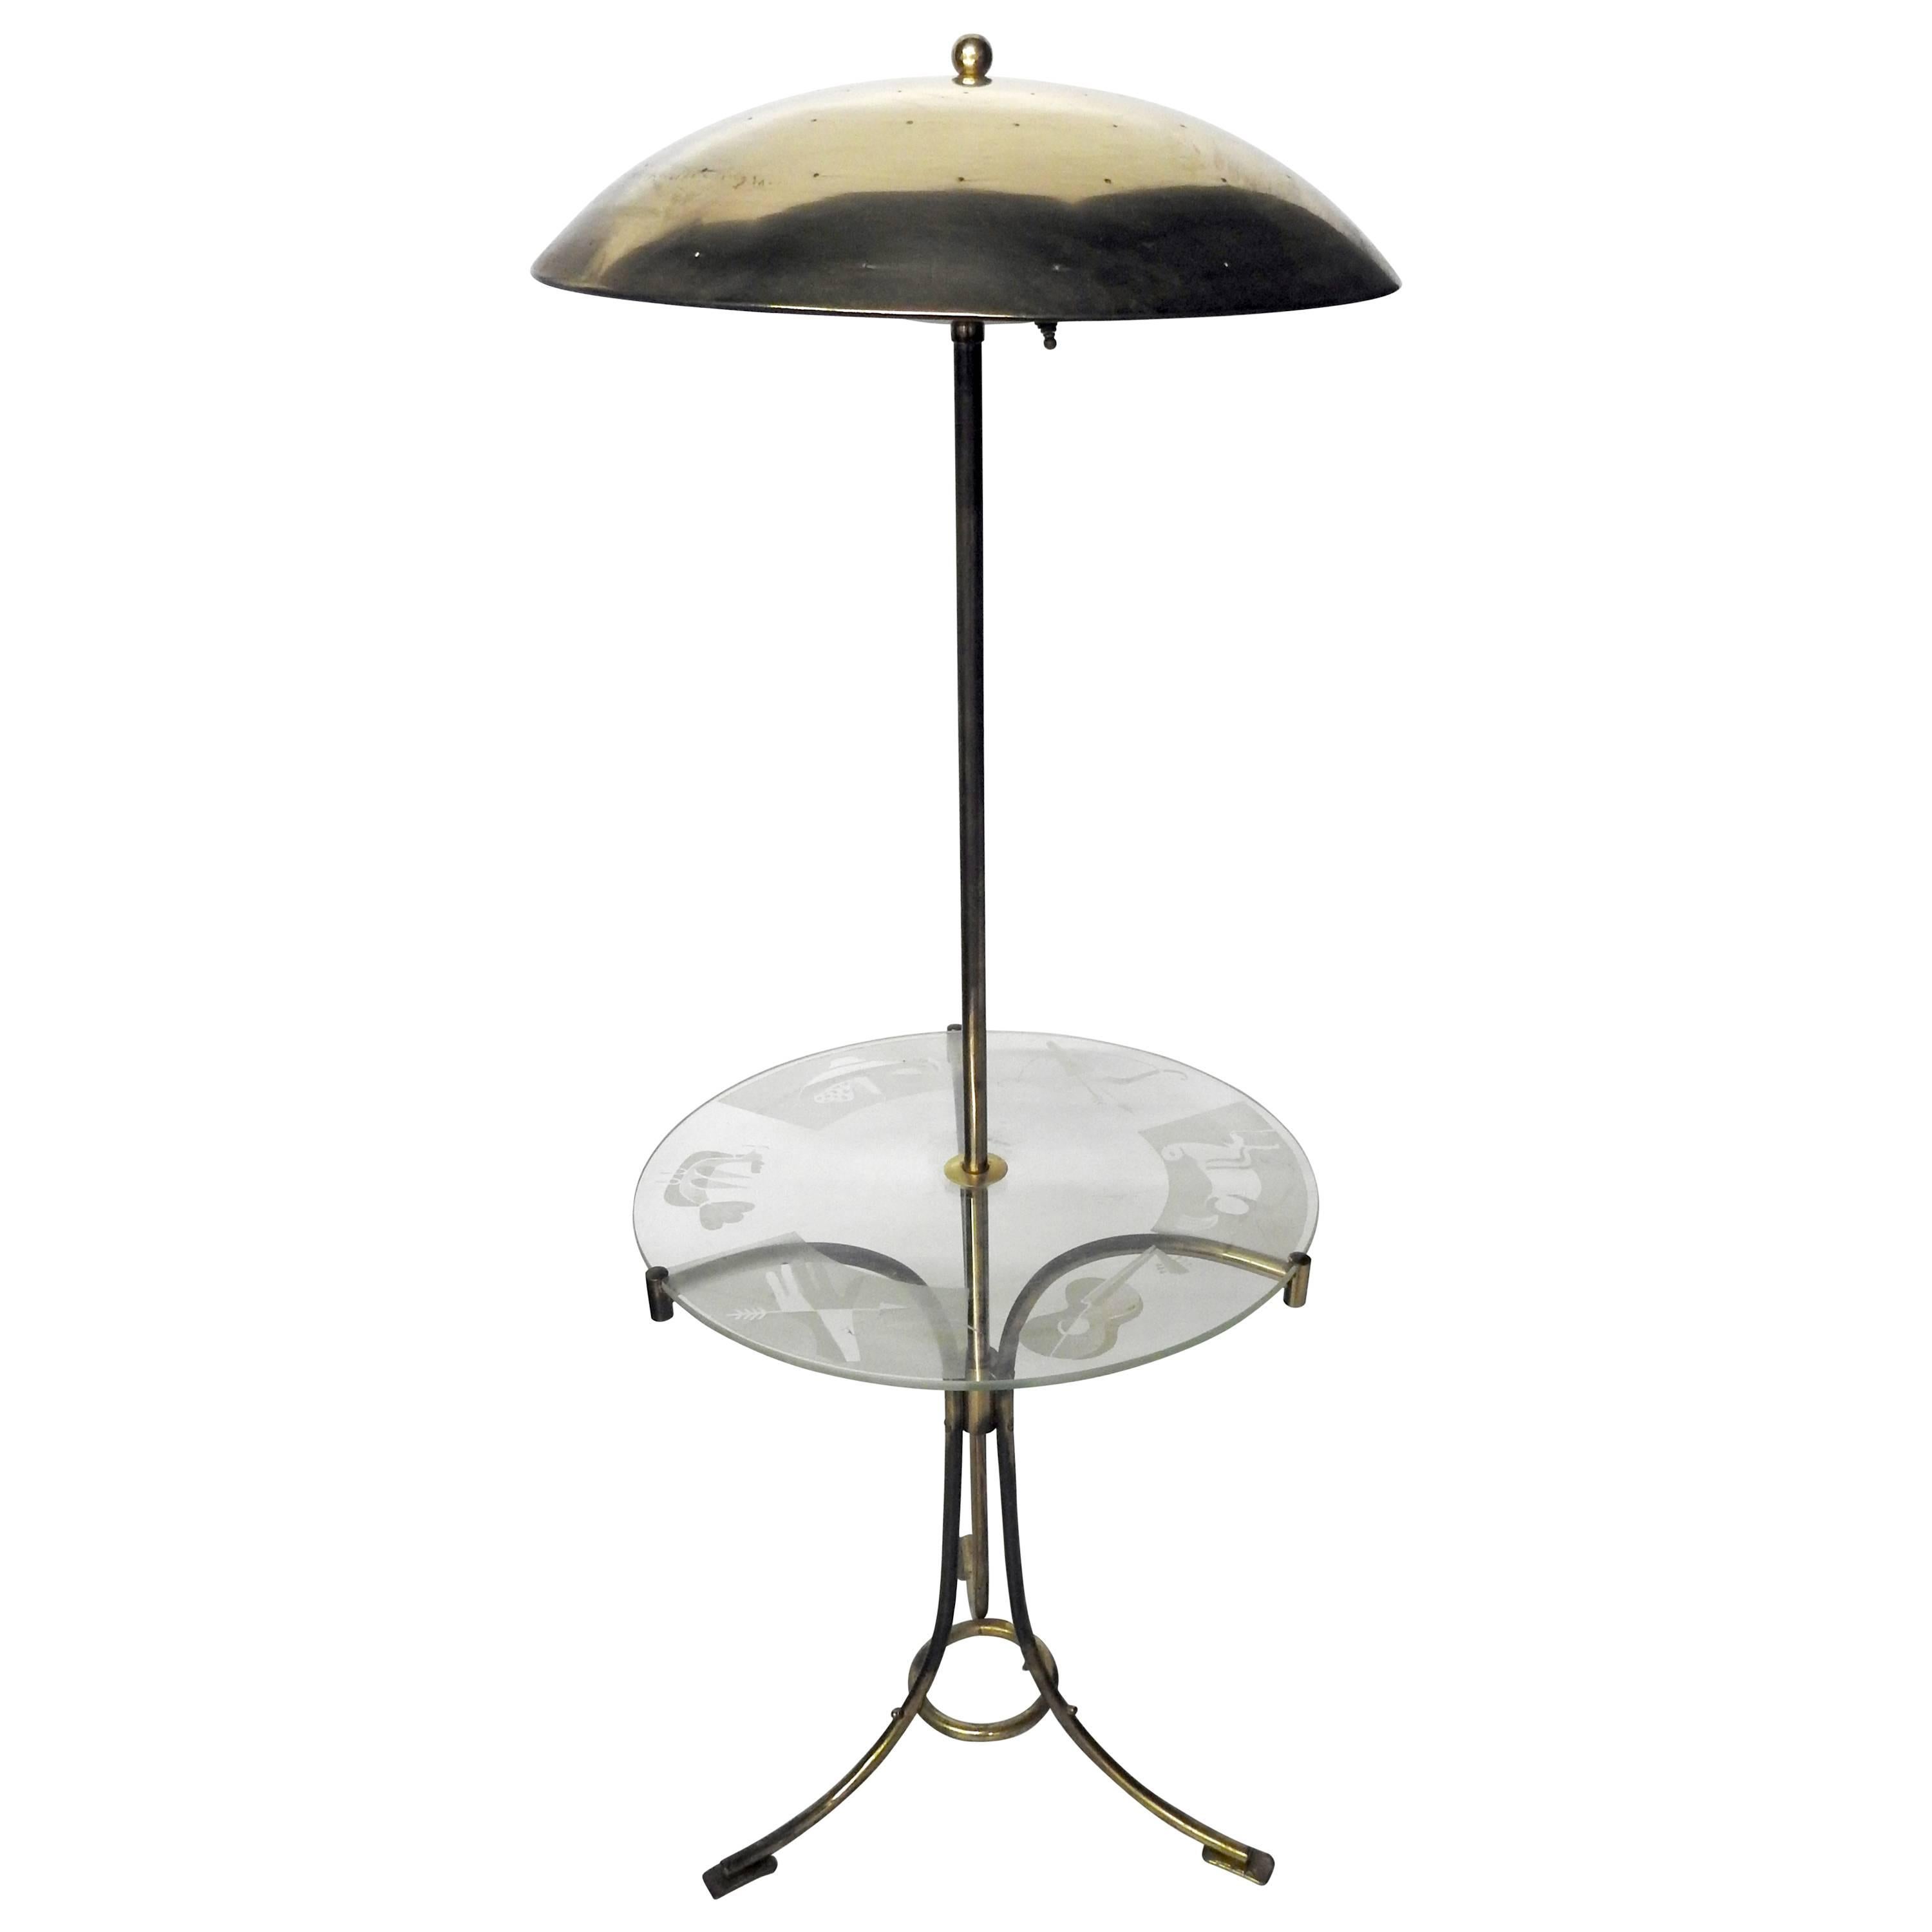 Mid-Century Modern Table Lamp For Sale